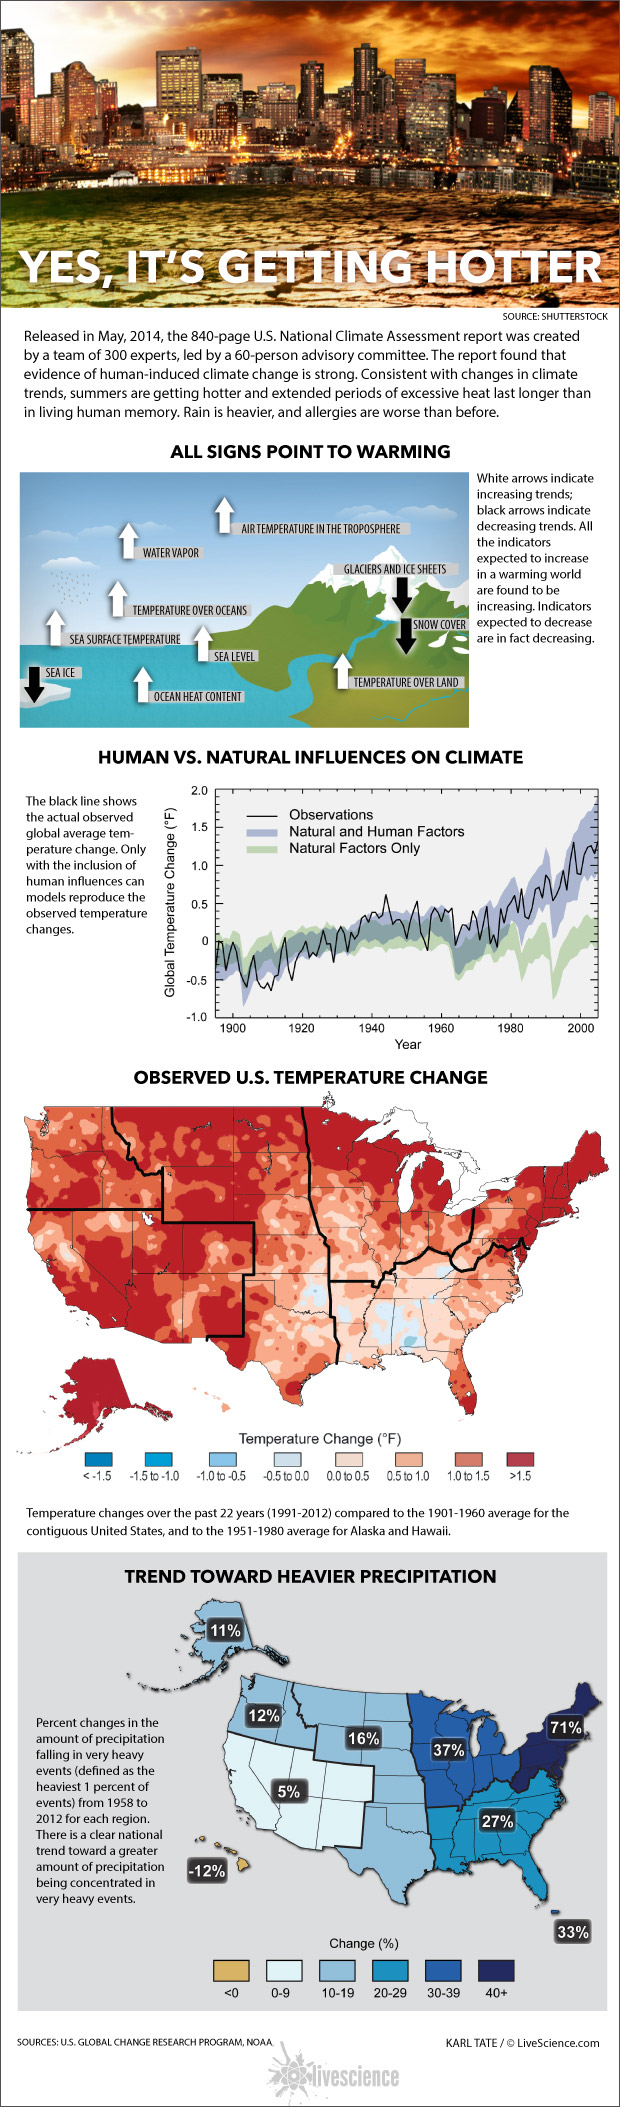 Global Warming Official Report Shows Climate Change is HumanCaused